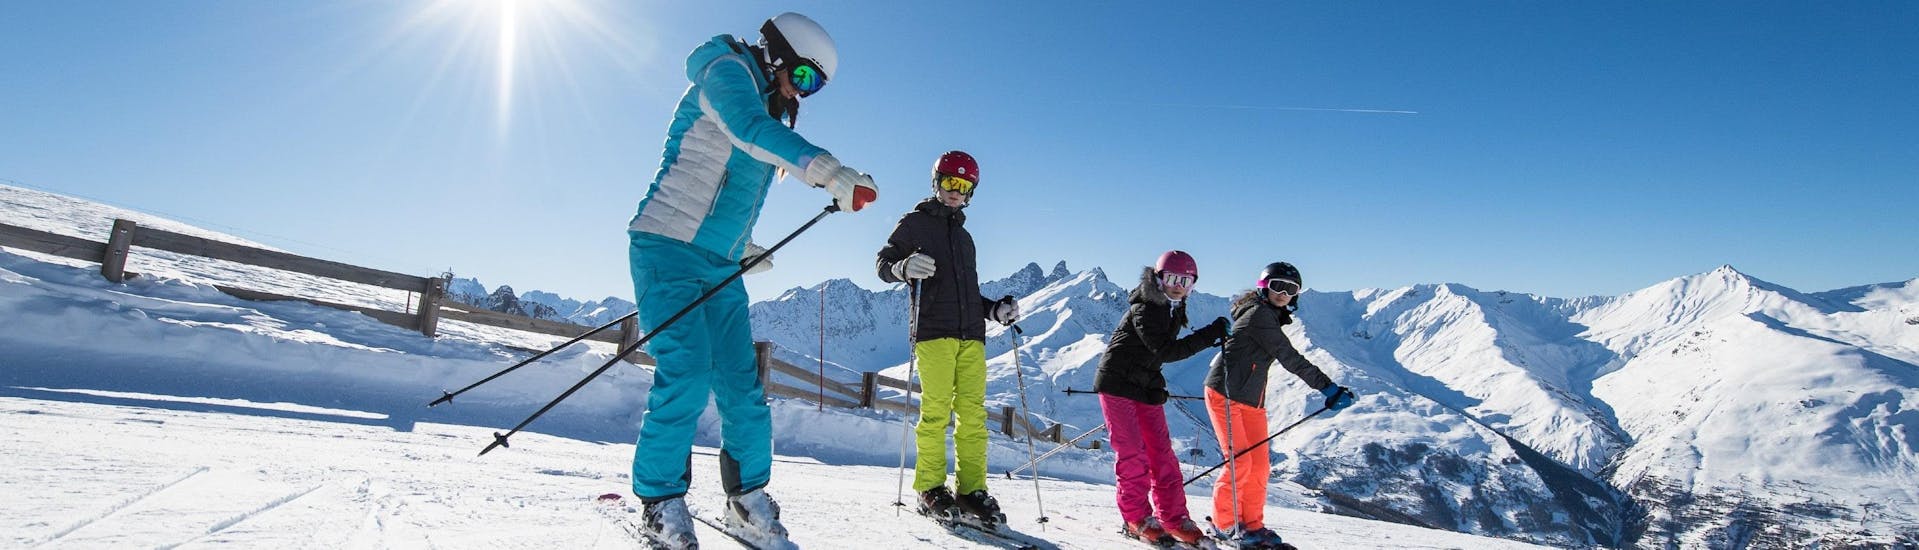 A ski instructor from ESI Alpe d'Huez - European Ski School is showing participants the right gestures during their Private Ski Lessons for Kids of All Levels.